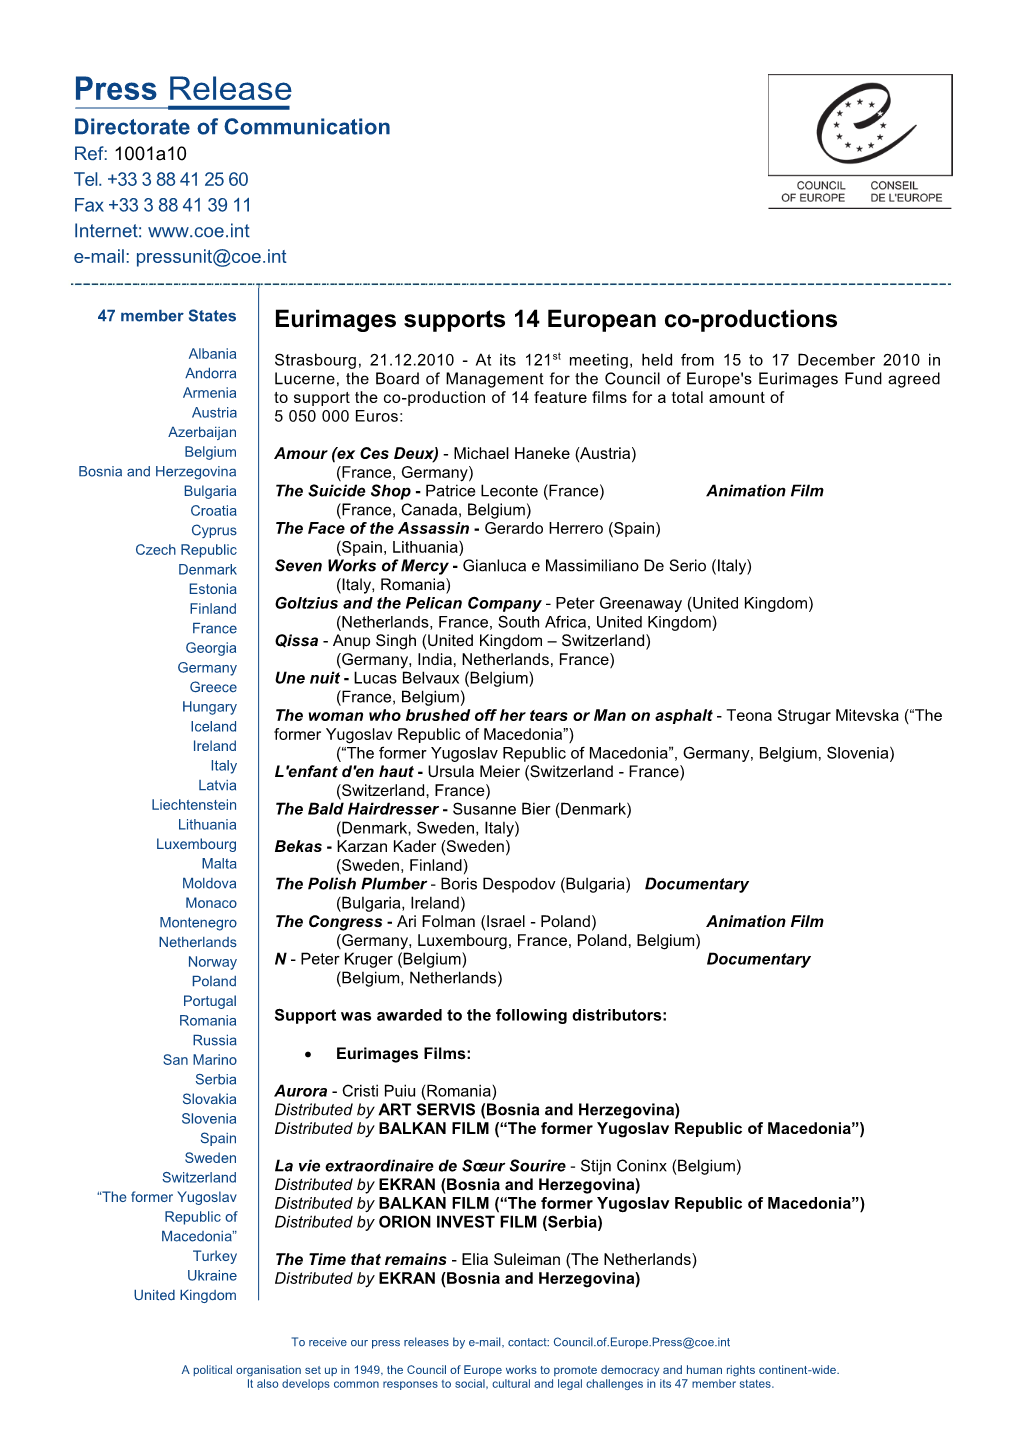 Eurimages Supports 14 European Co-Productions